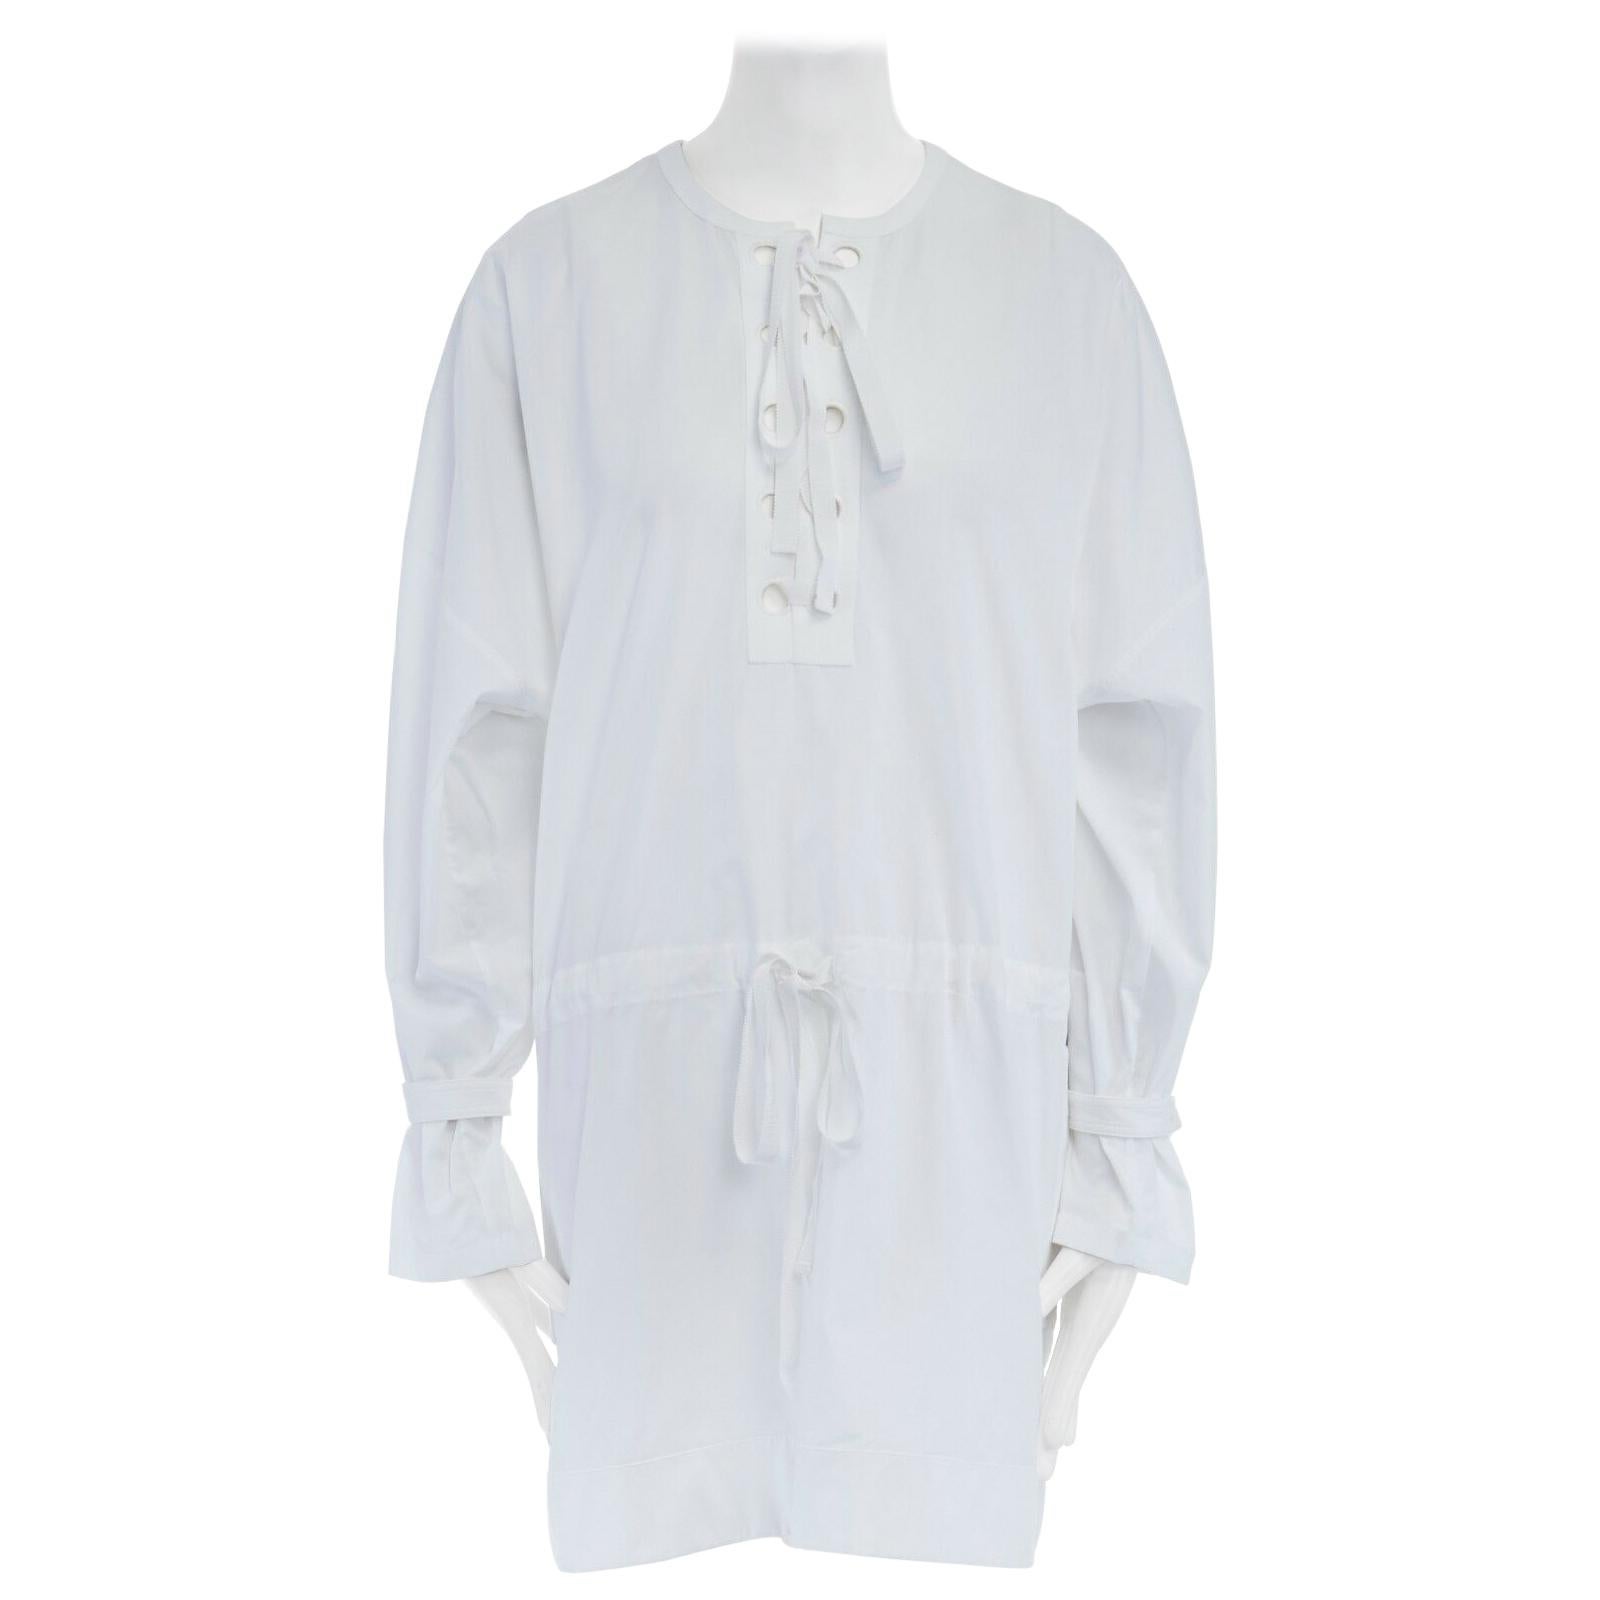 new ALEXANDER MCQUEEN white cotton lace front tunic dress FR38 US8 UK10 M